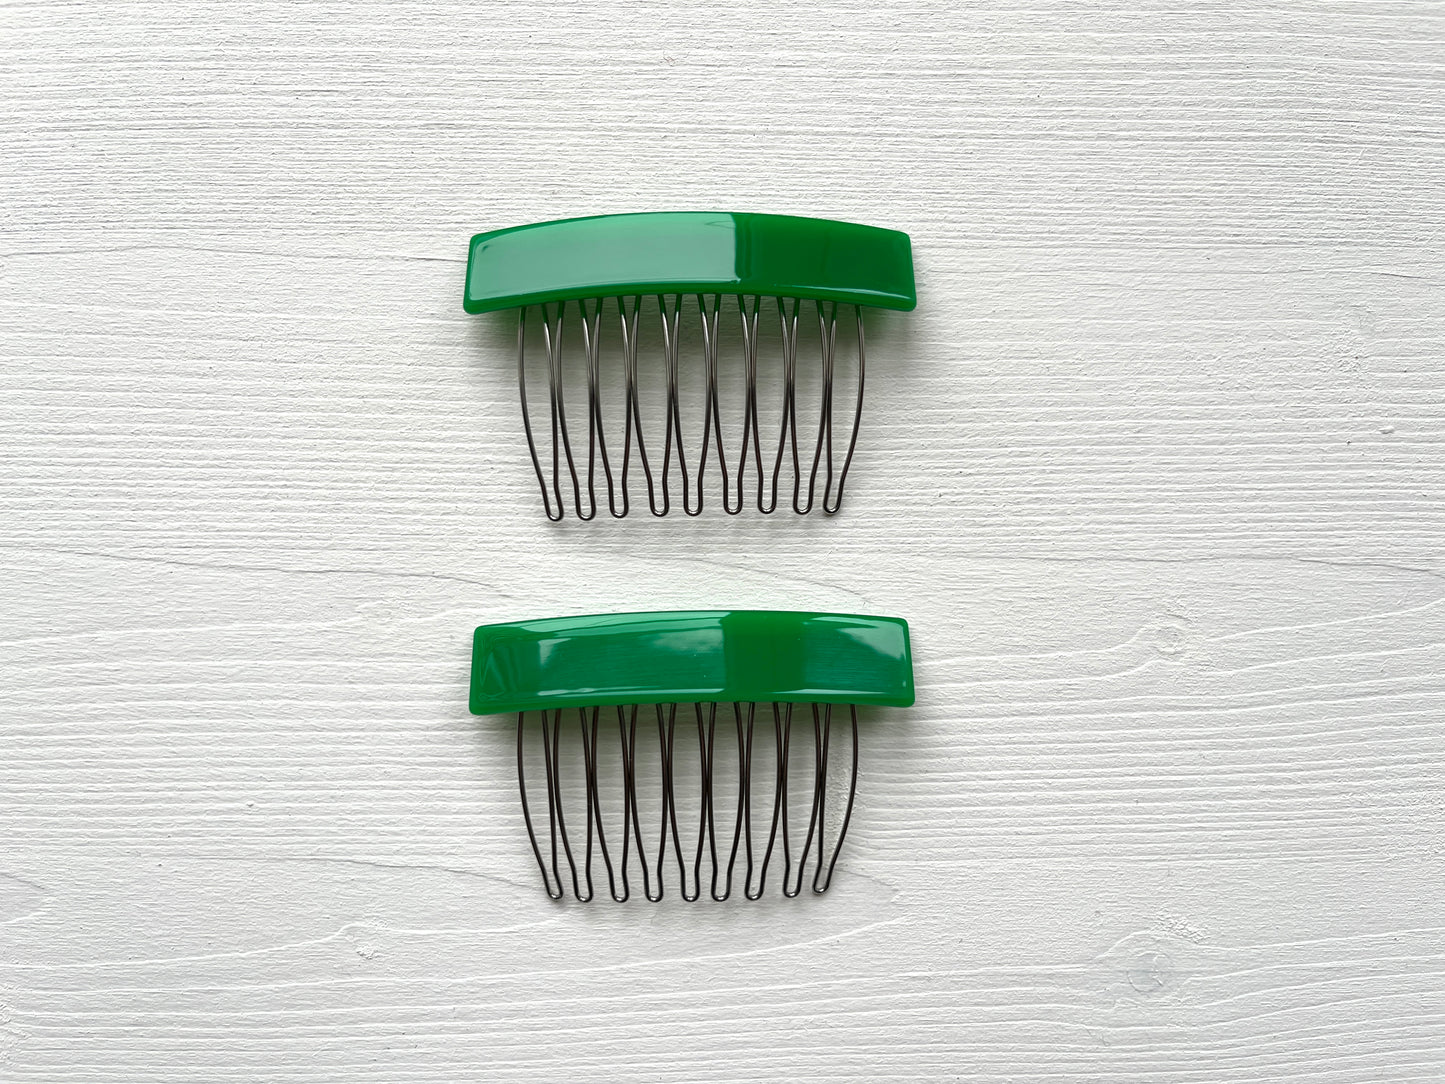 Lily Comb in Green Set of Two